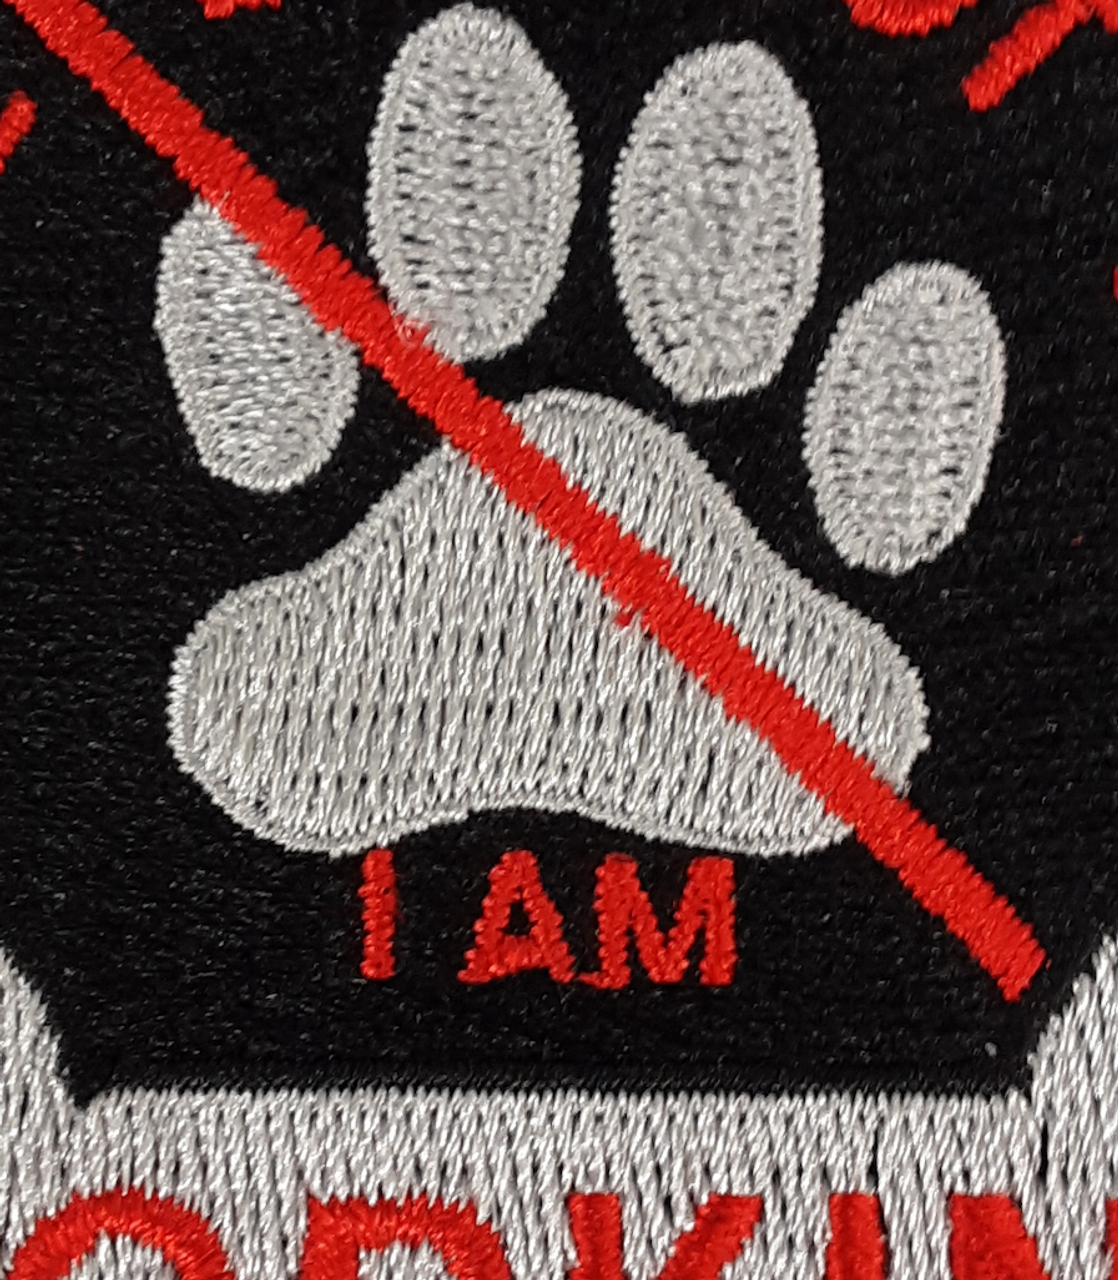 Embroidery Service Dog Patches Ask To Do Not Pet Patch Vest - Temu